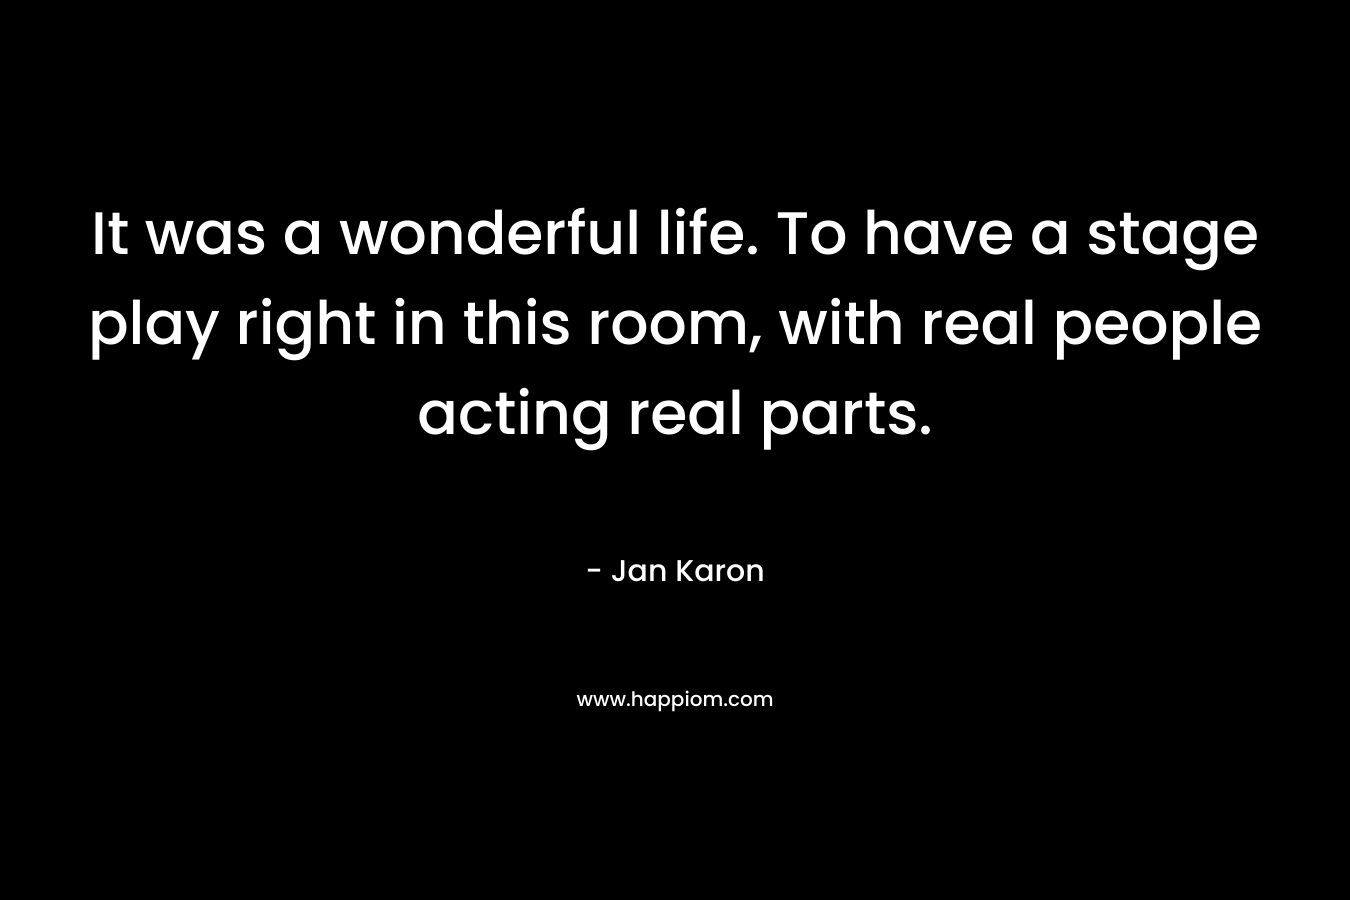 It was a wonderful life. To have a stage play right in this room, with real people acting real parts. – Jan Karon